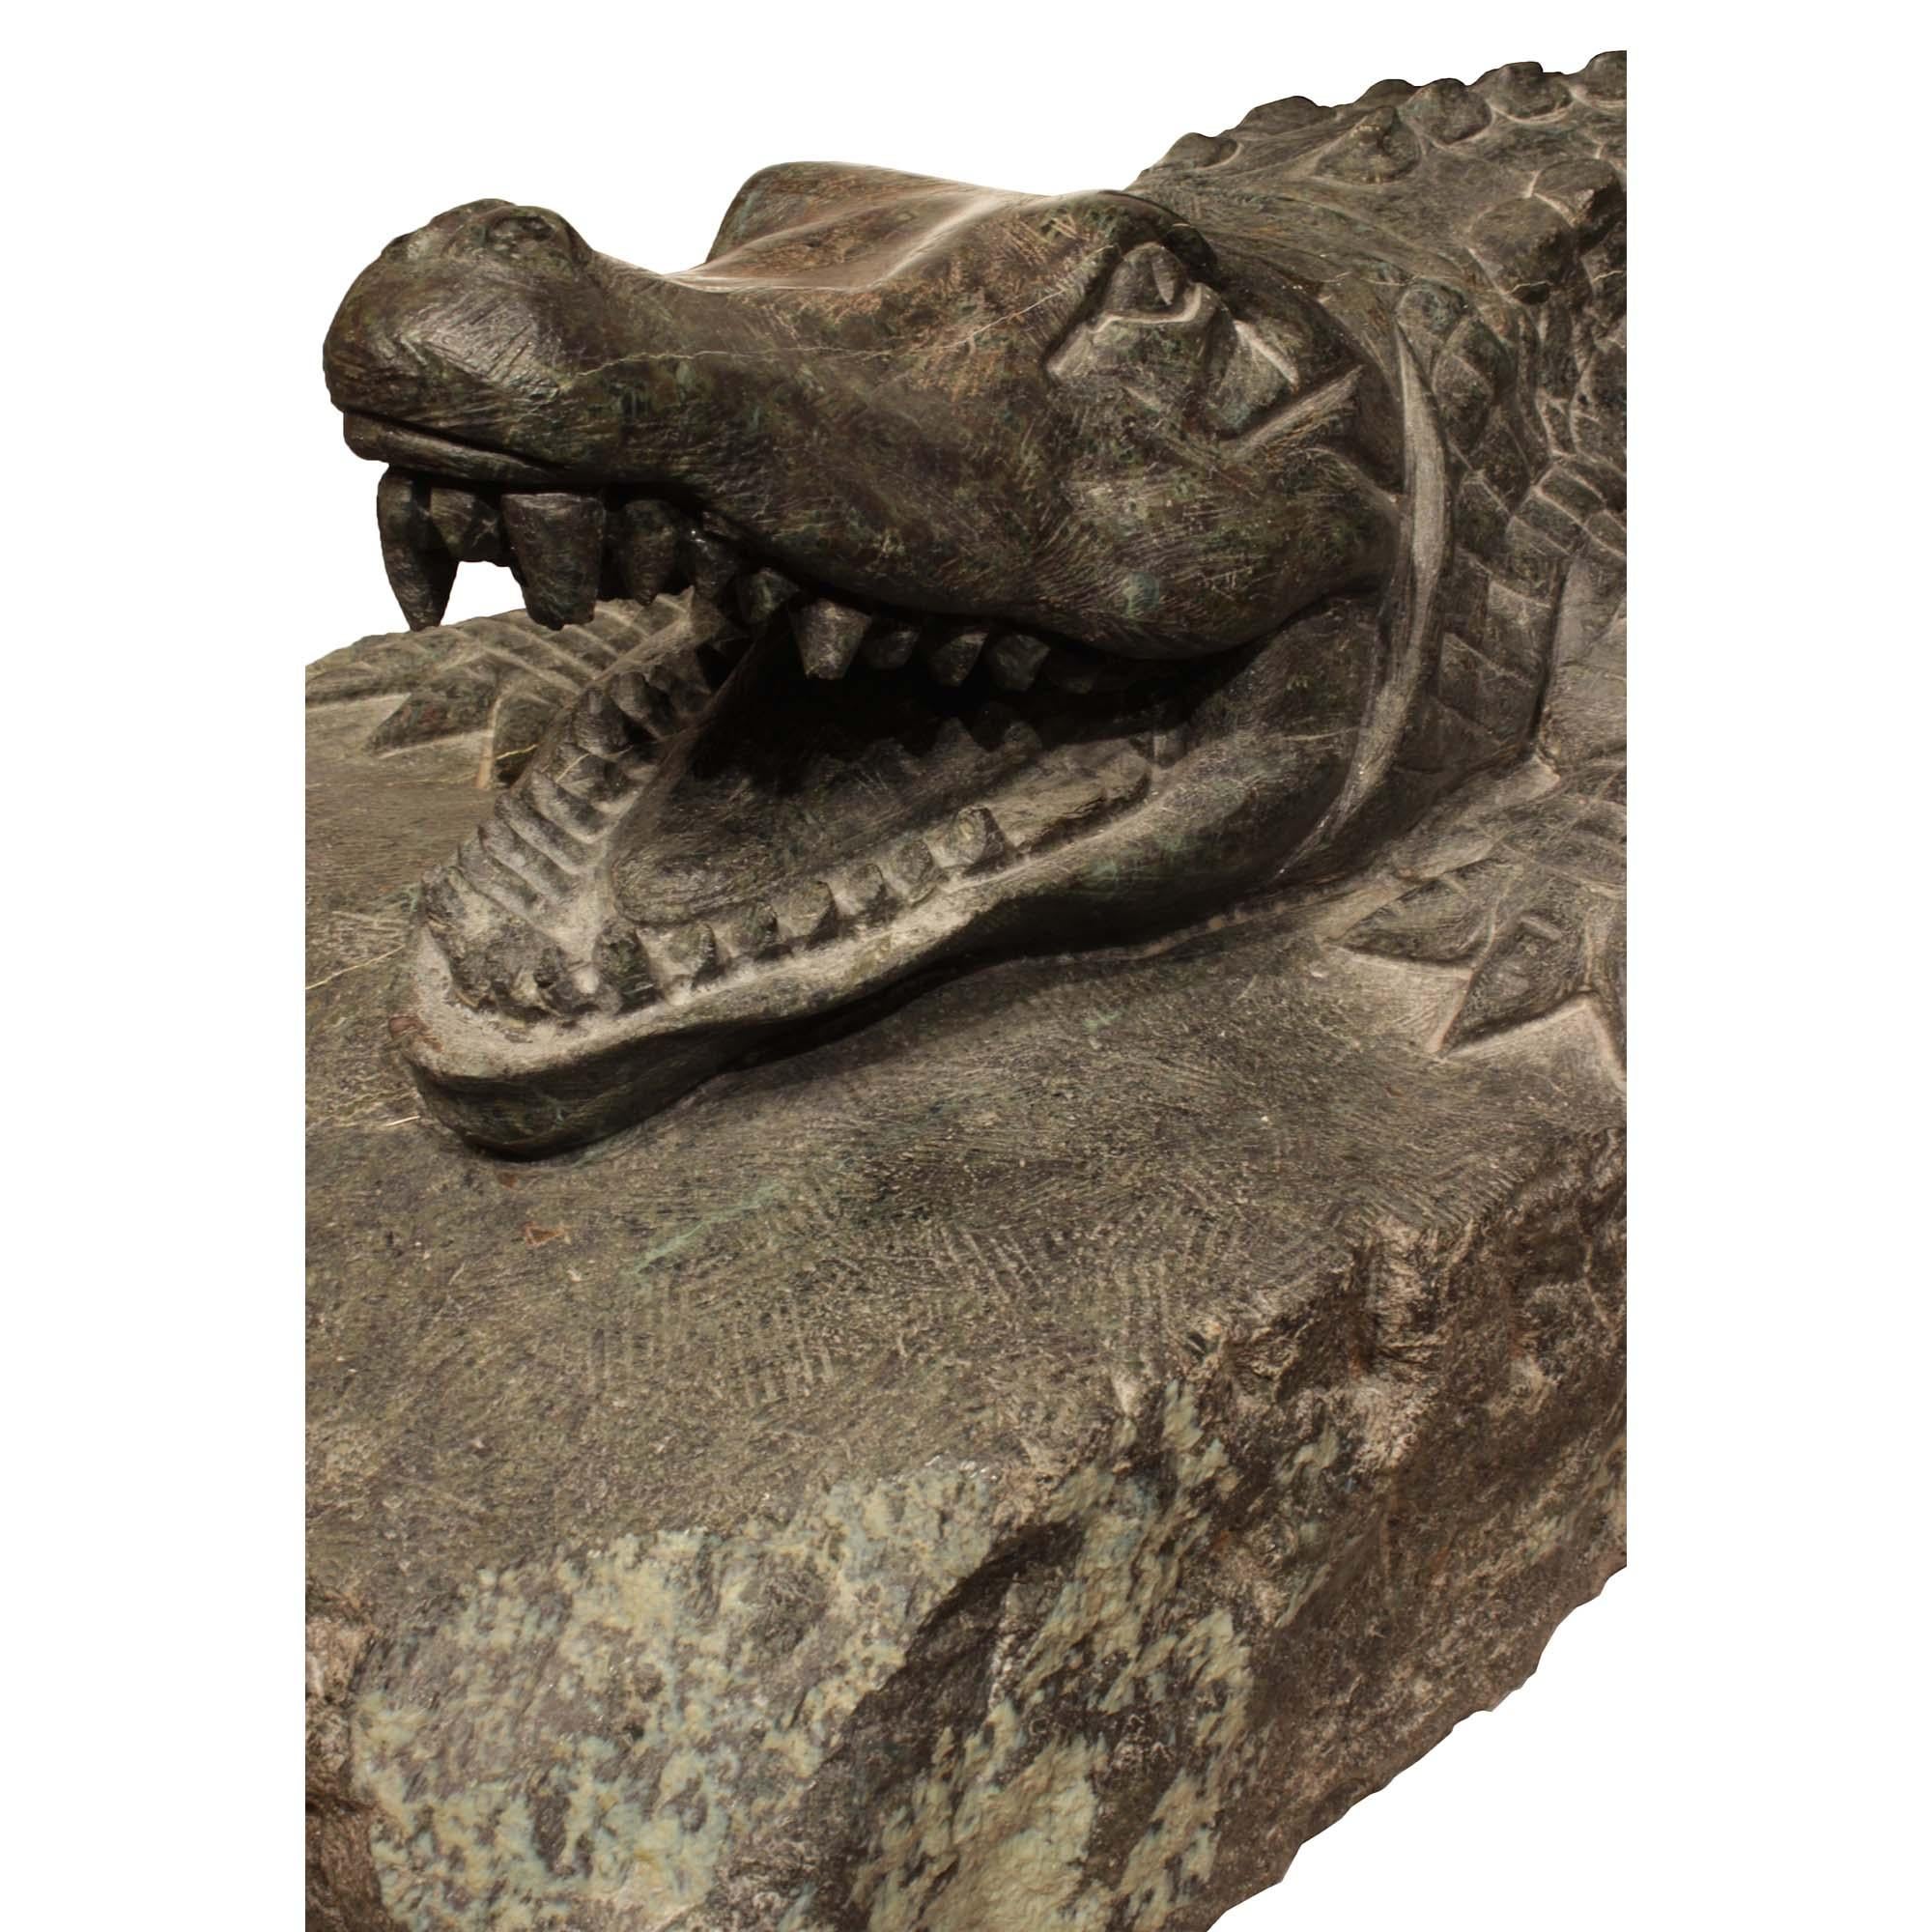 Italian 19th Century Verde Prato Marble Alligator Sculpture, from Florence For Sale 2